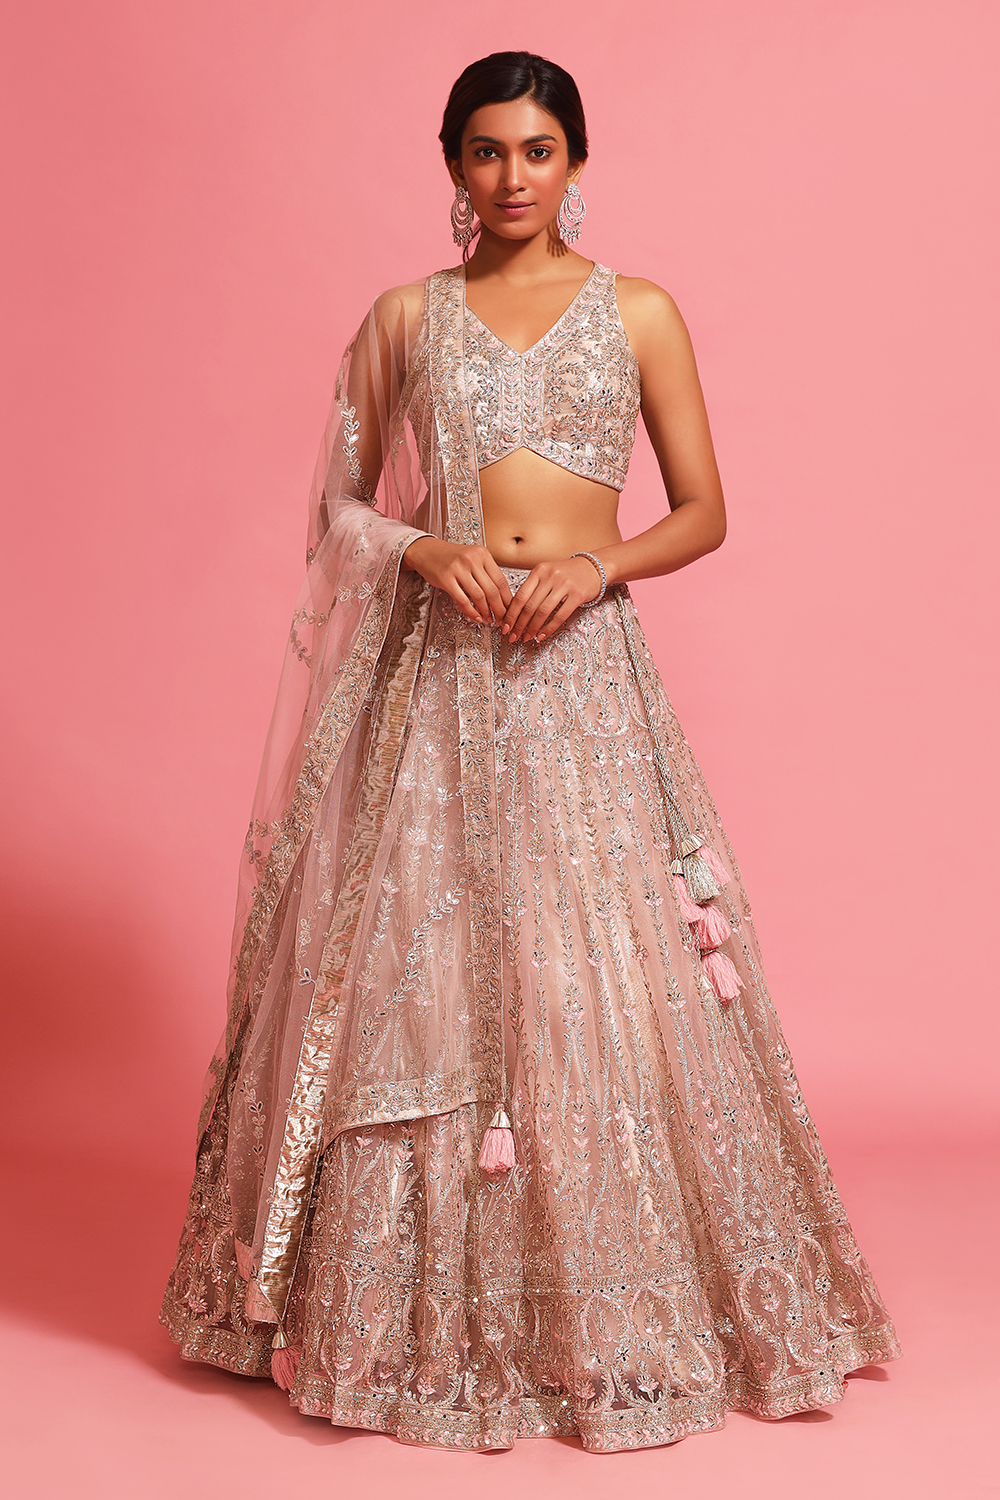 Stunning Royal Pink Engagement Gown | Wedding gowns indian, Wedding  photography poses unique, Gowns